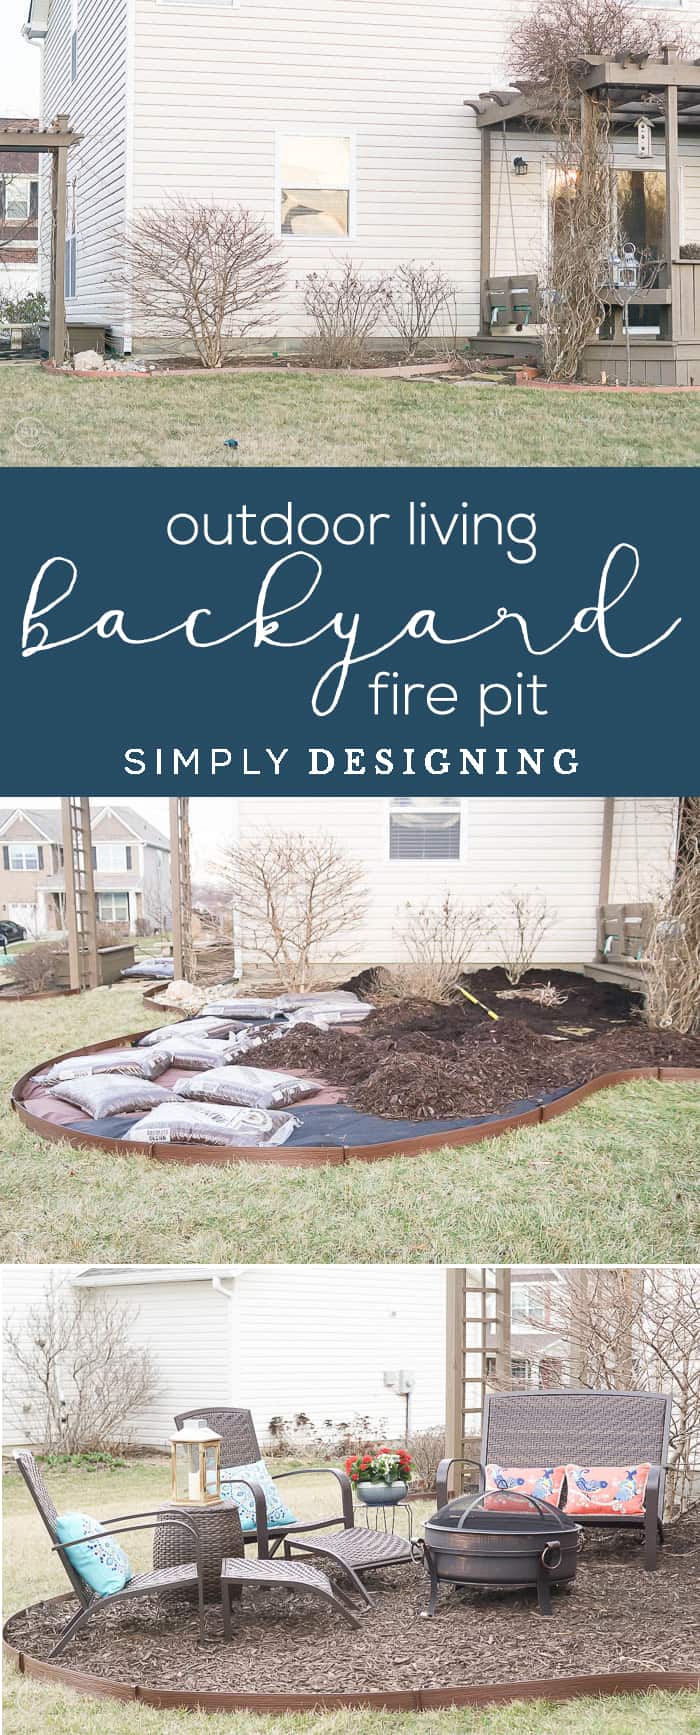 Outdoor Living with an Easy Backyard Fire Pit - easily create more outdoor living space